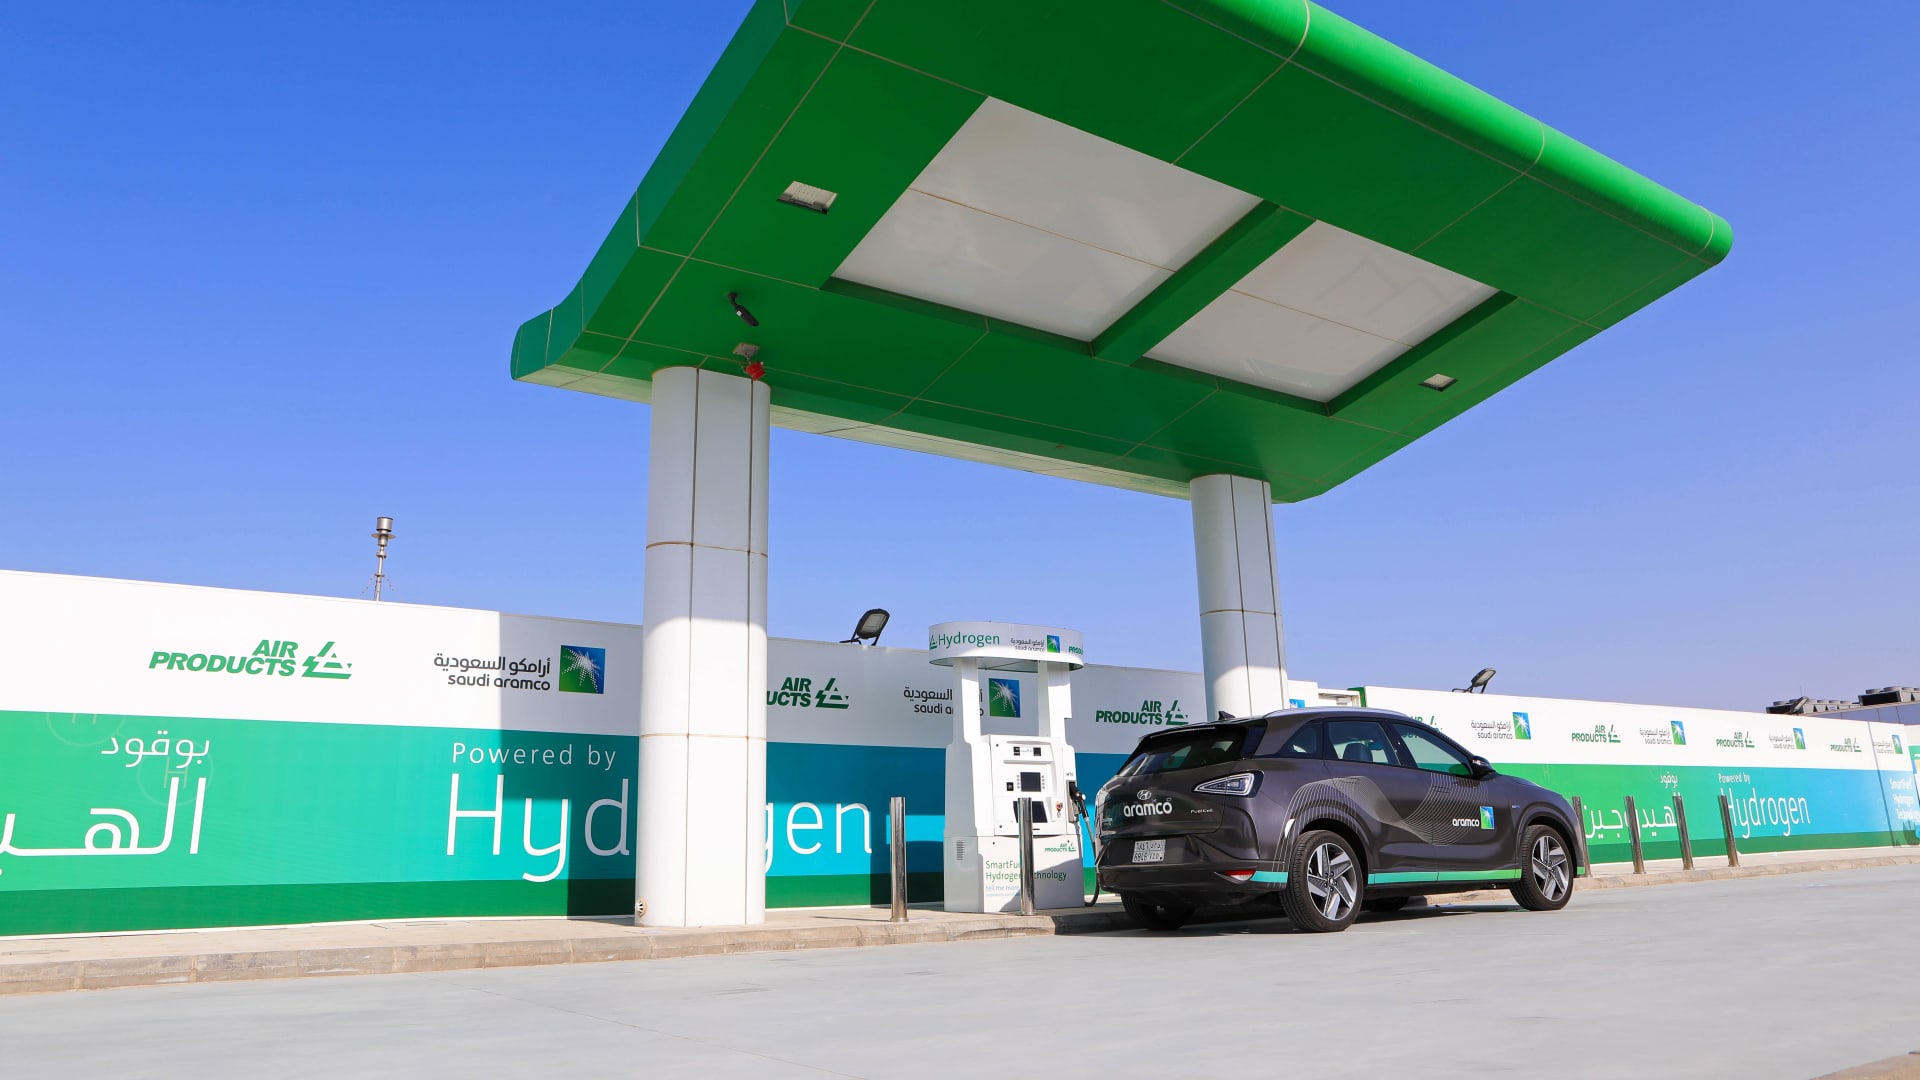 A hydrogen-powered vehicle during refueling at the newly opened hydrogen fueling station, operated by Saudi Aramco, in the Air Products New Technology Center in Dhahran, Saudi Arabia, on Sunday, June 27, 2021. Saudi Aramco outlined plans to invest in blue hydrogen as the world shifts away from dirtier forms of energy, but said it will take at least until the end of this decade before a global market for the fuel is developed.